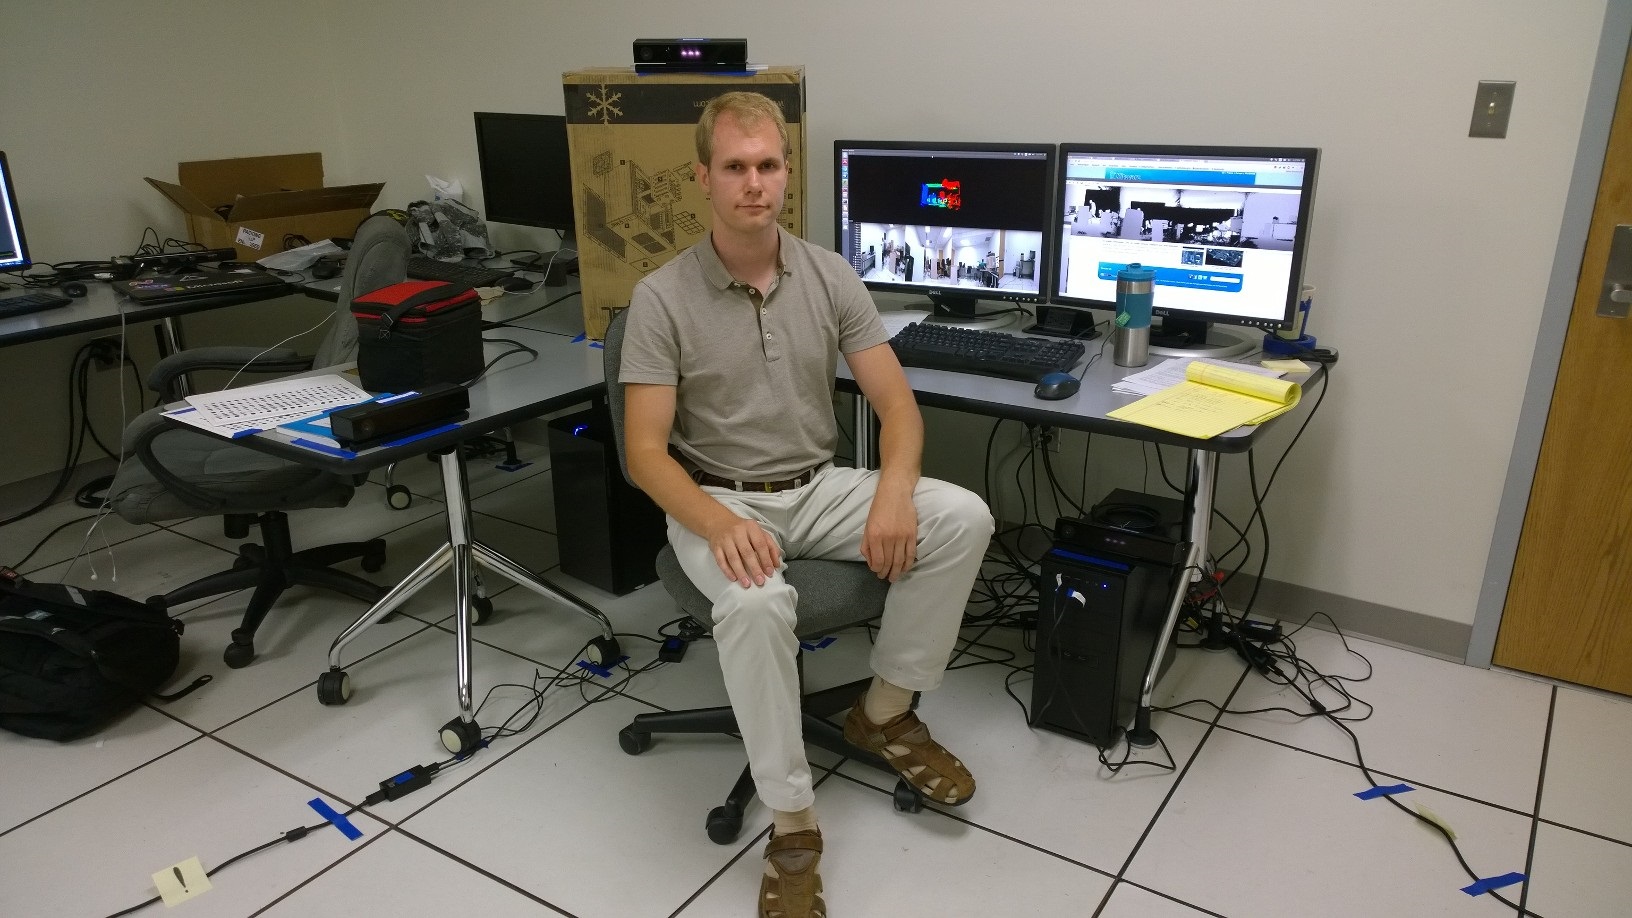 Umd Kinect Q A An Interview With Gregory Kramida At The